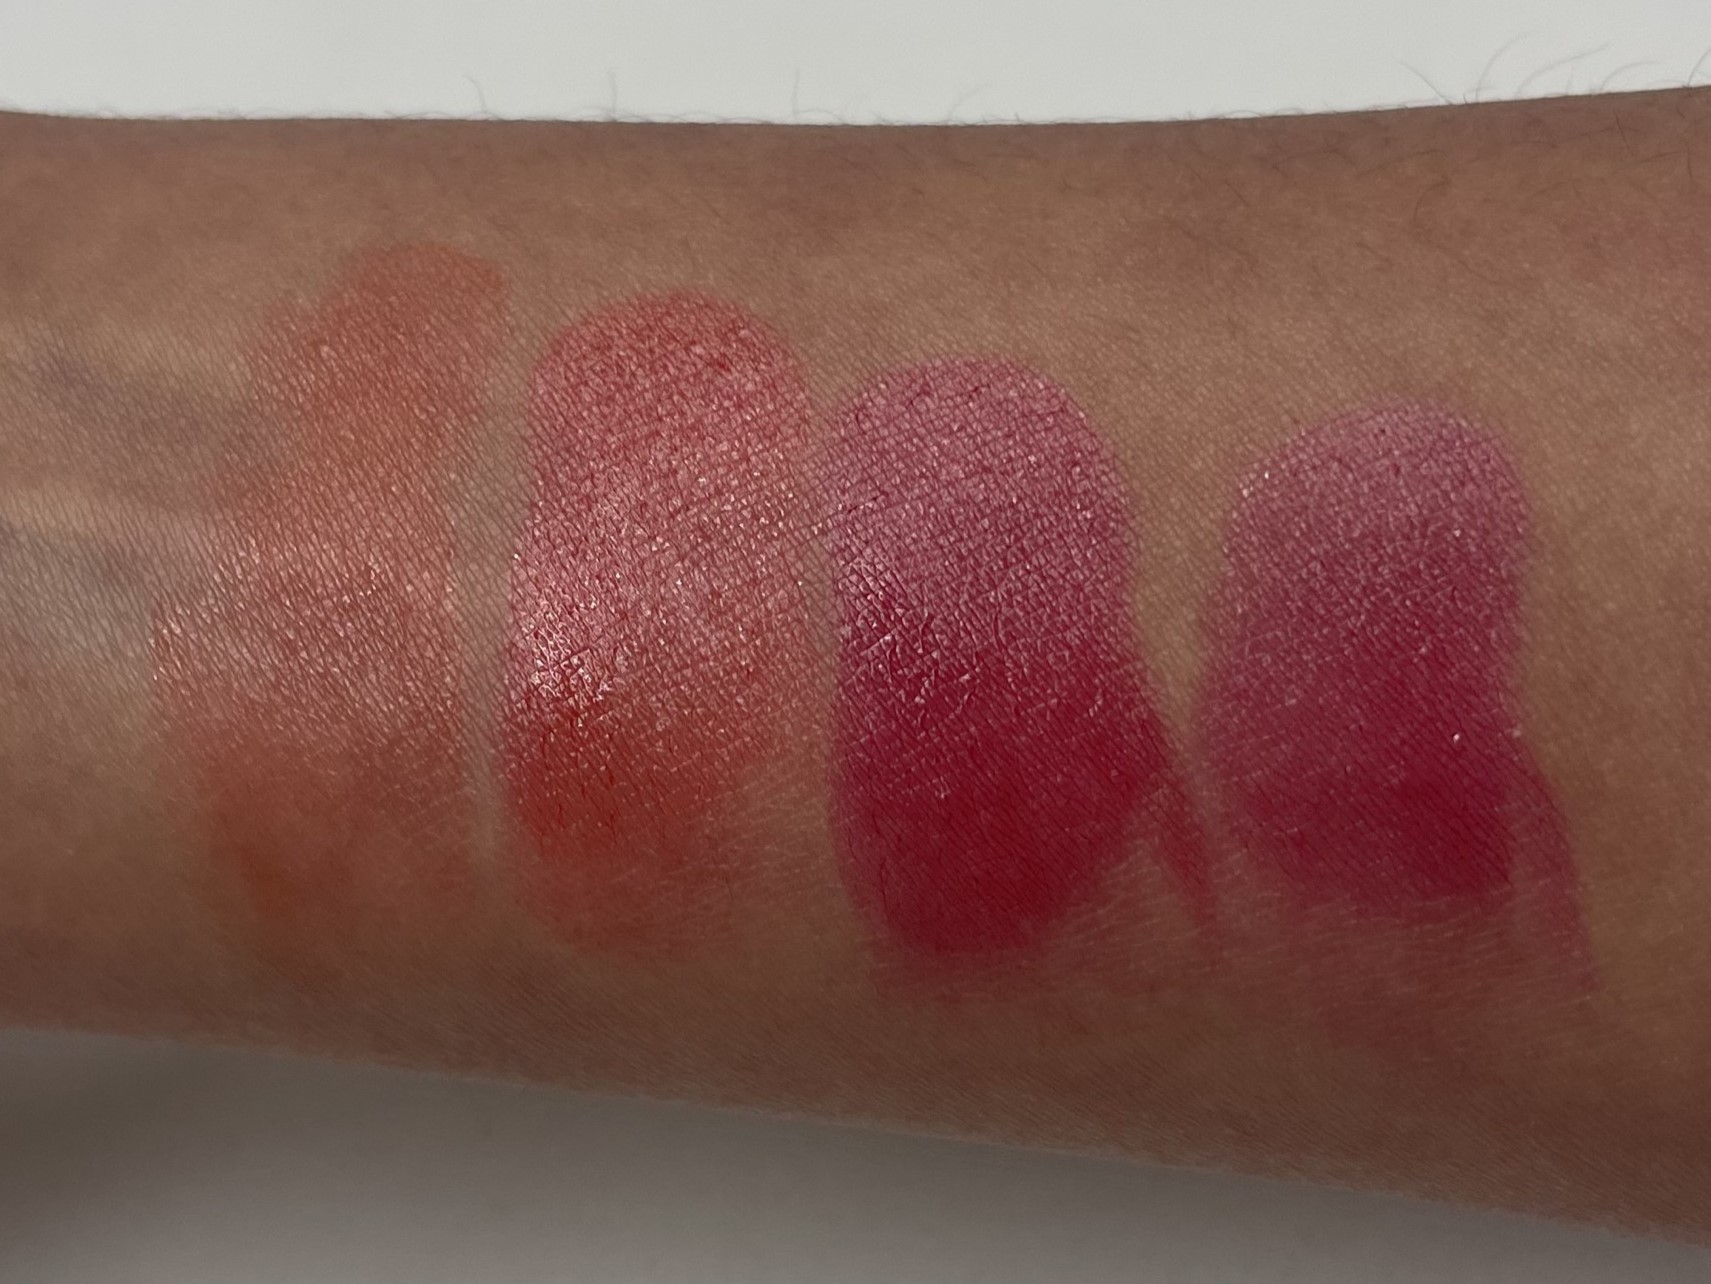 Milk Makeup Cooling Water Jelly Tint swatches | Space NK